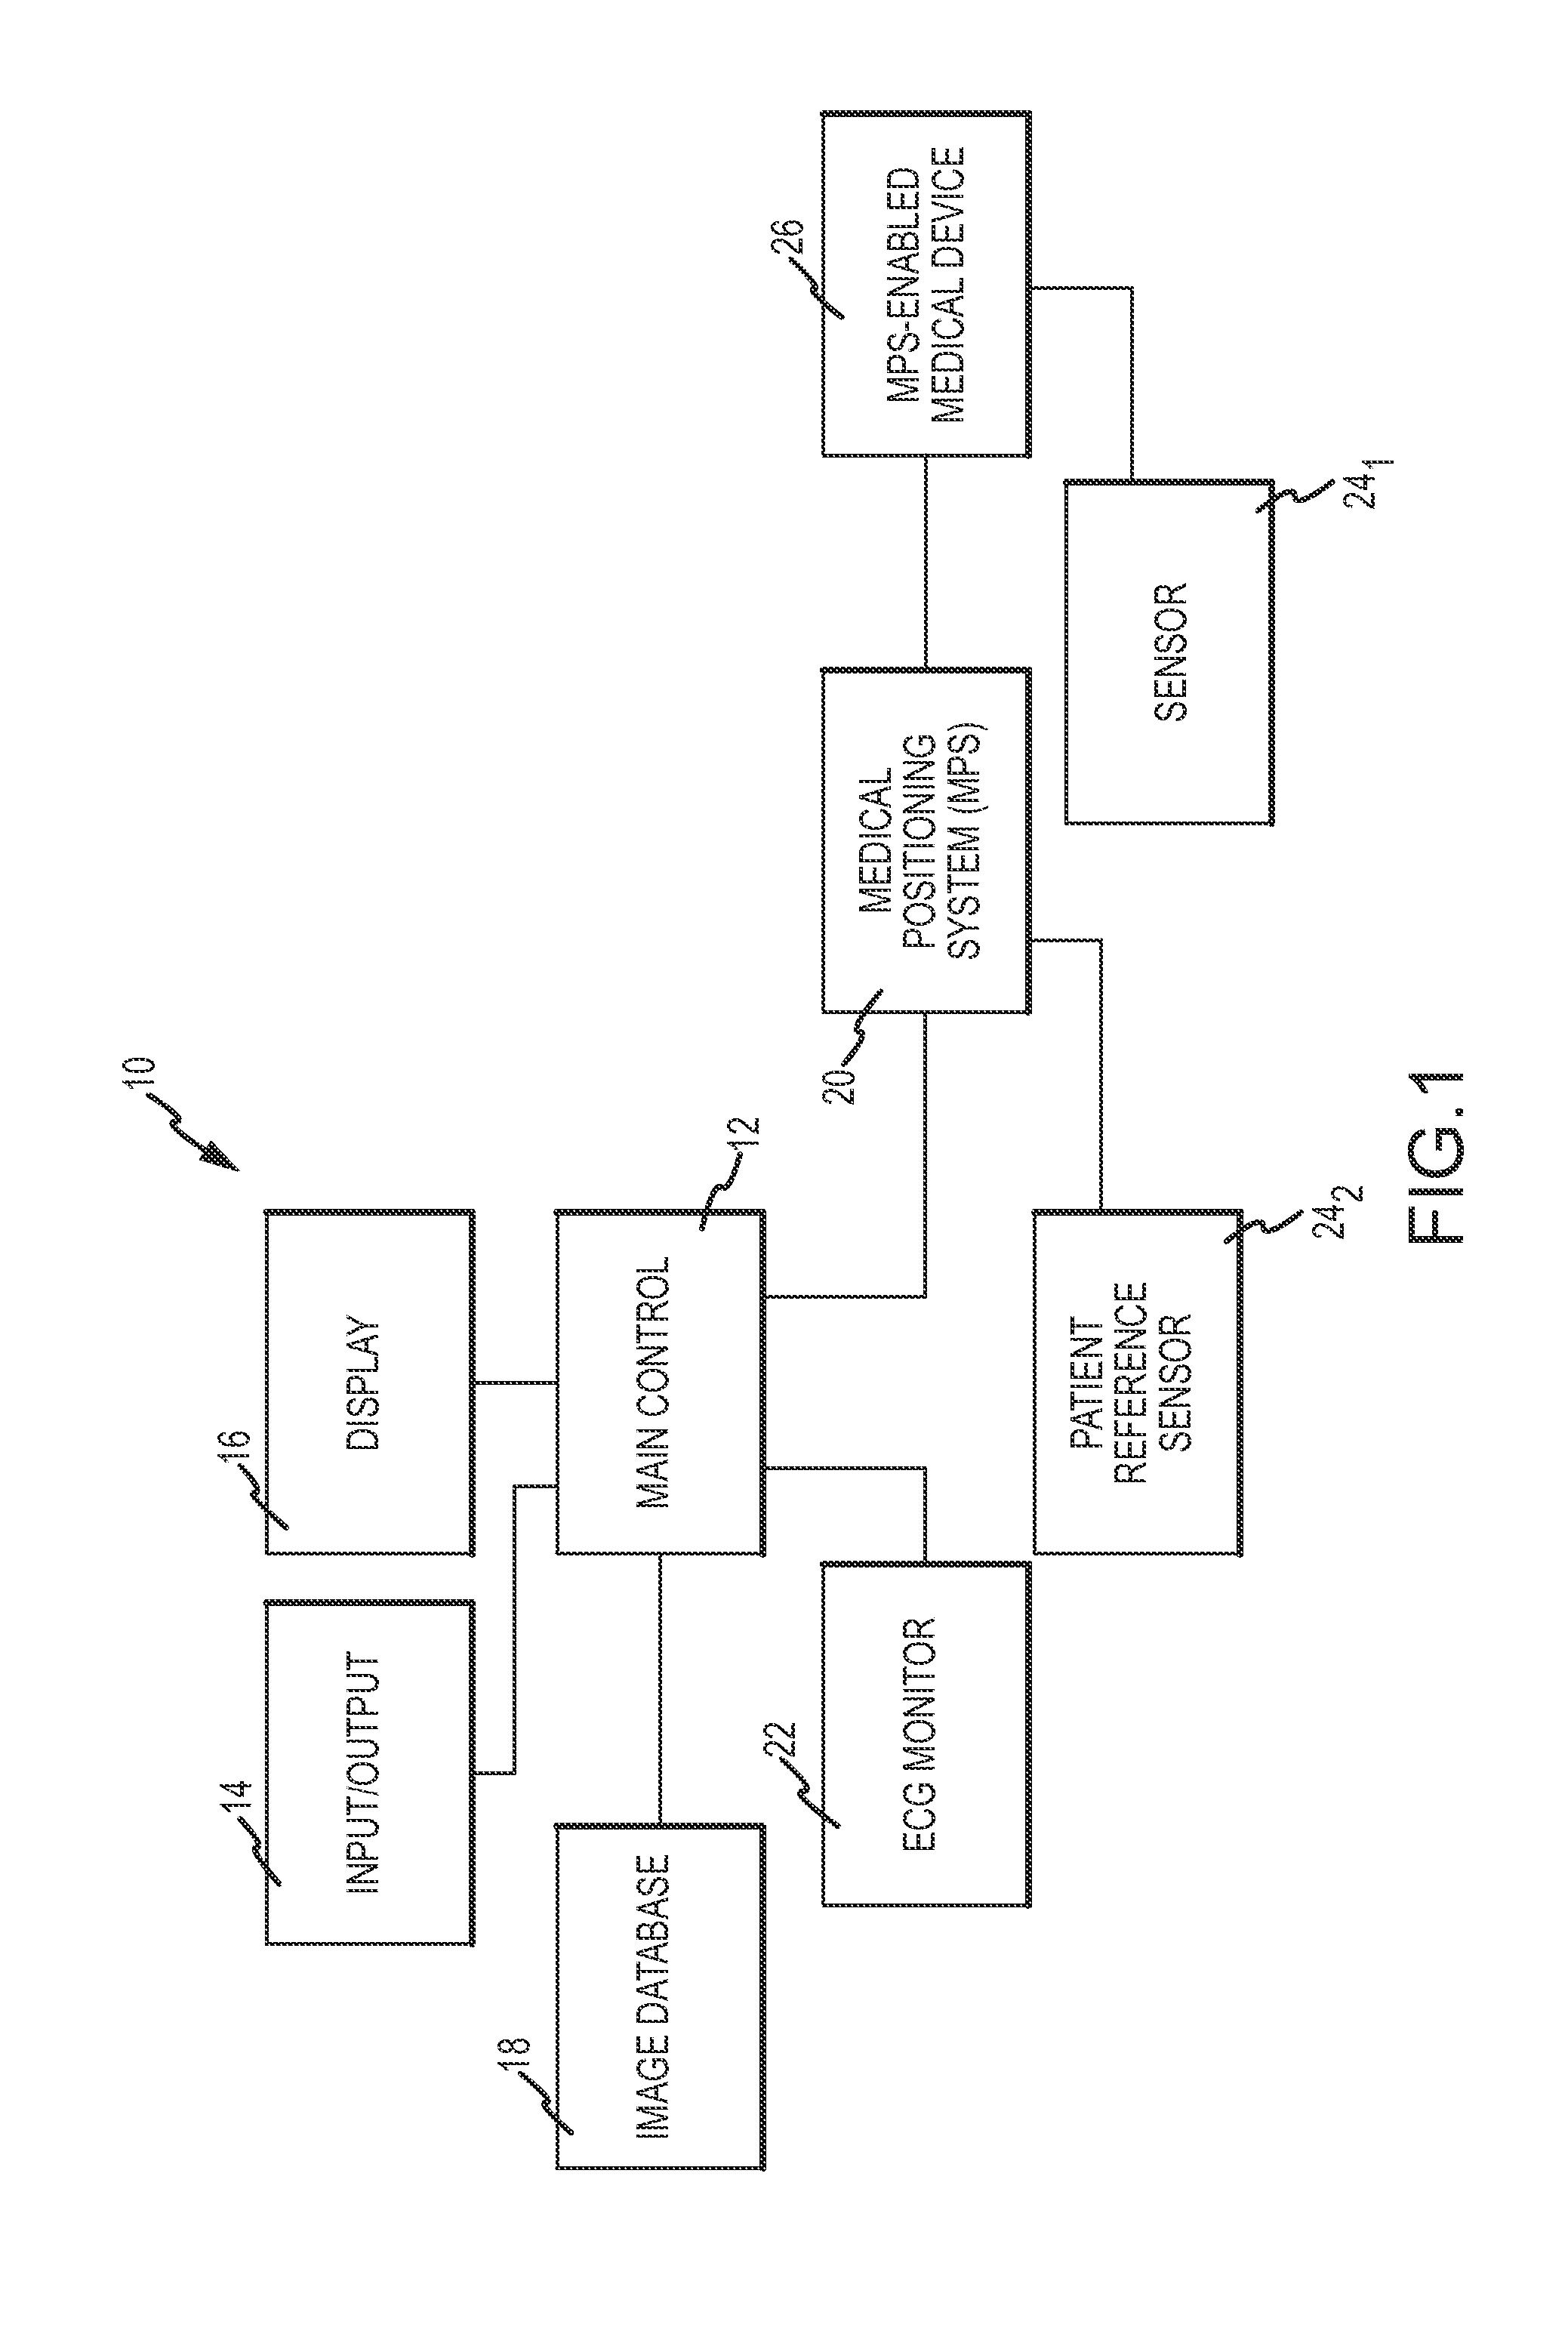 Method of assembling a positioning sensor and associated wiring on a medical tool